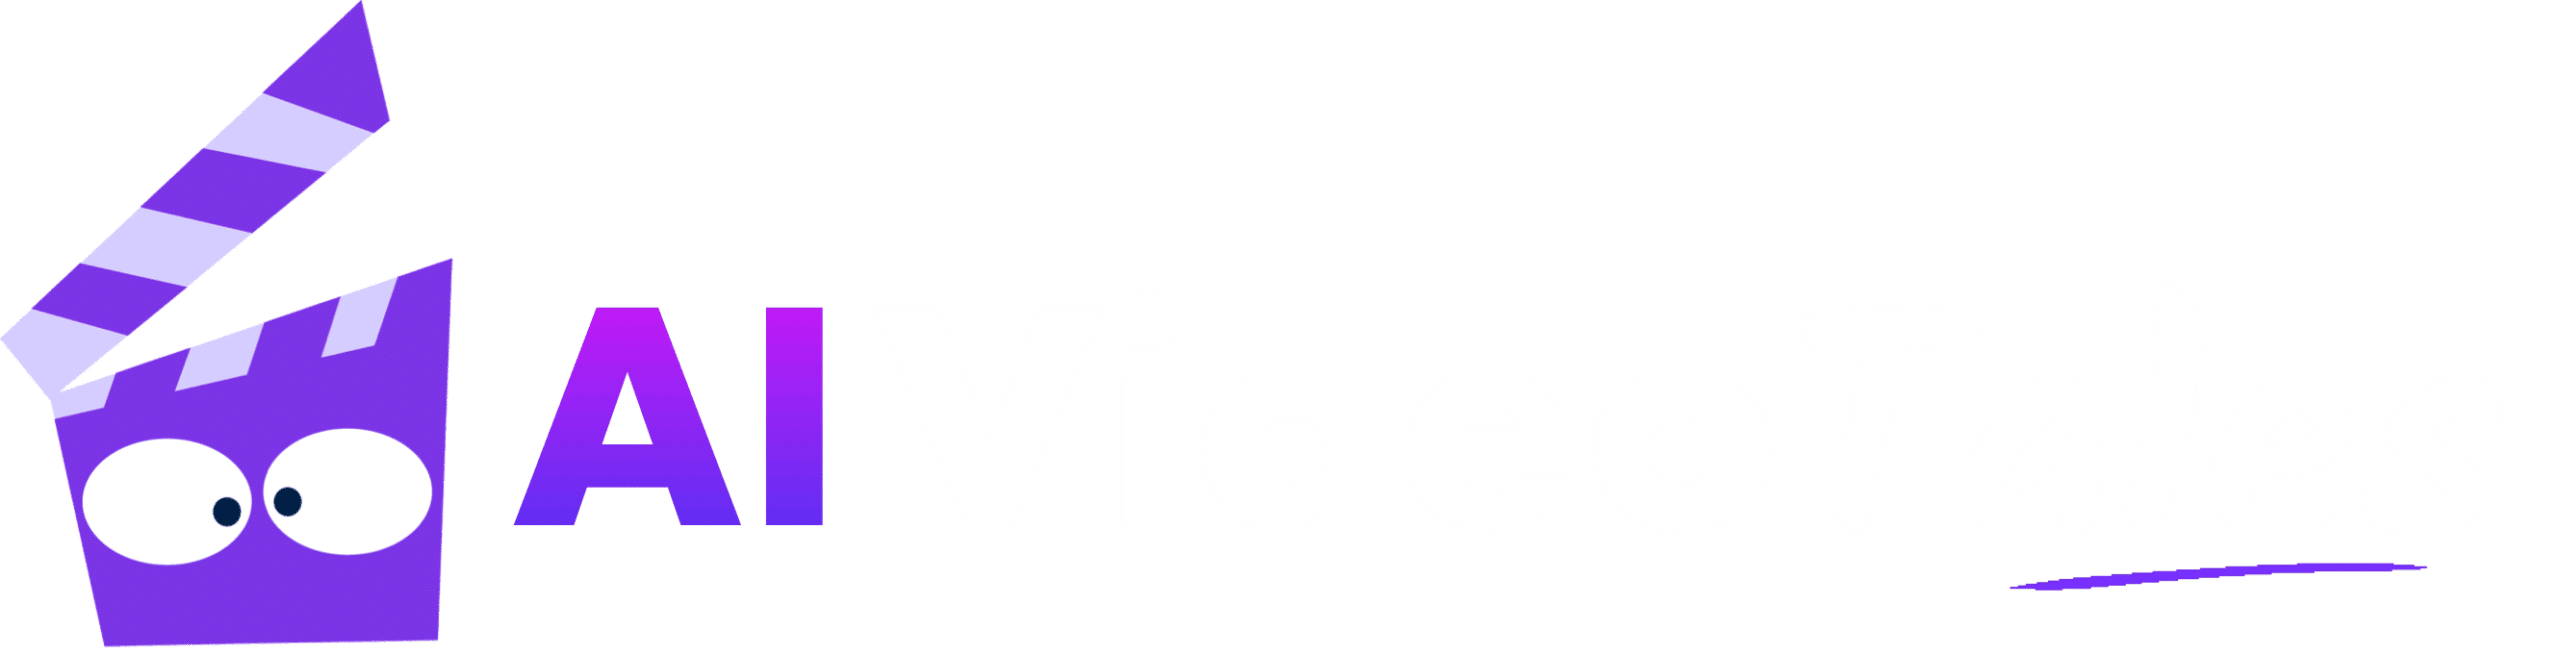 logo aivideotales w